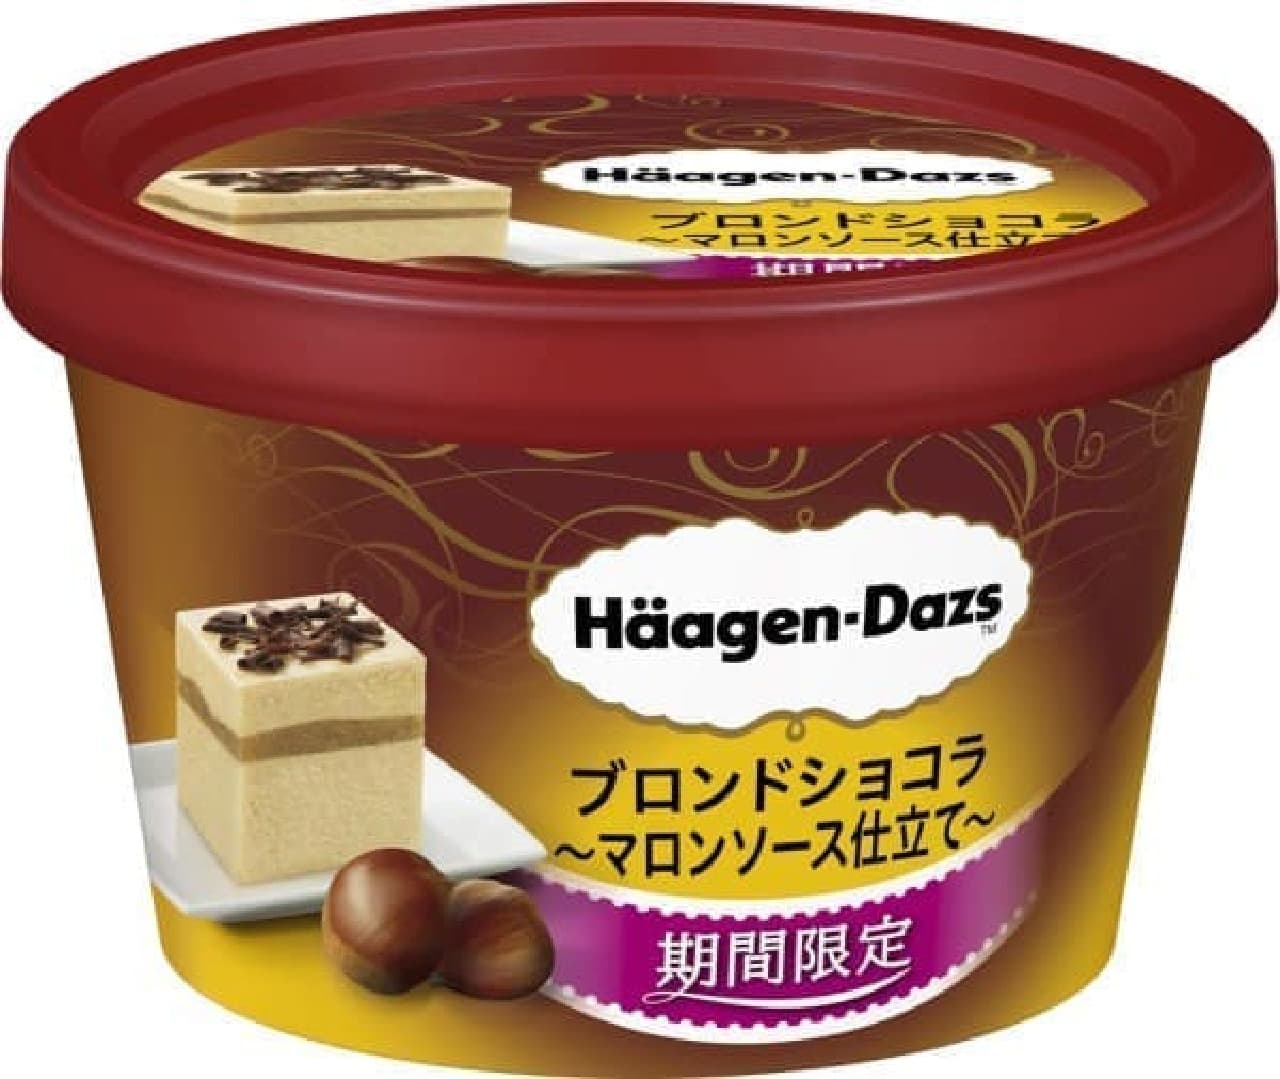 Lawson and Natural Lawson Limited Haagen-Dazs "Blonde Chocolat-Marron Sauce Tailoring-"